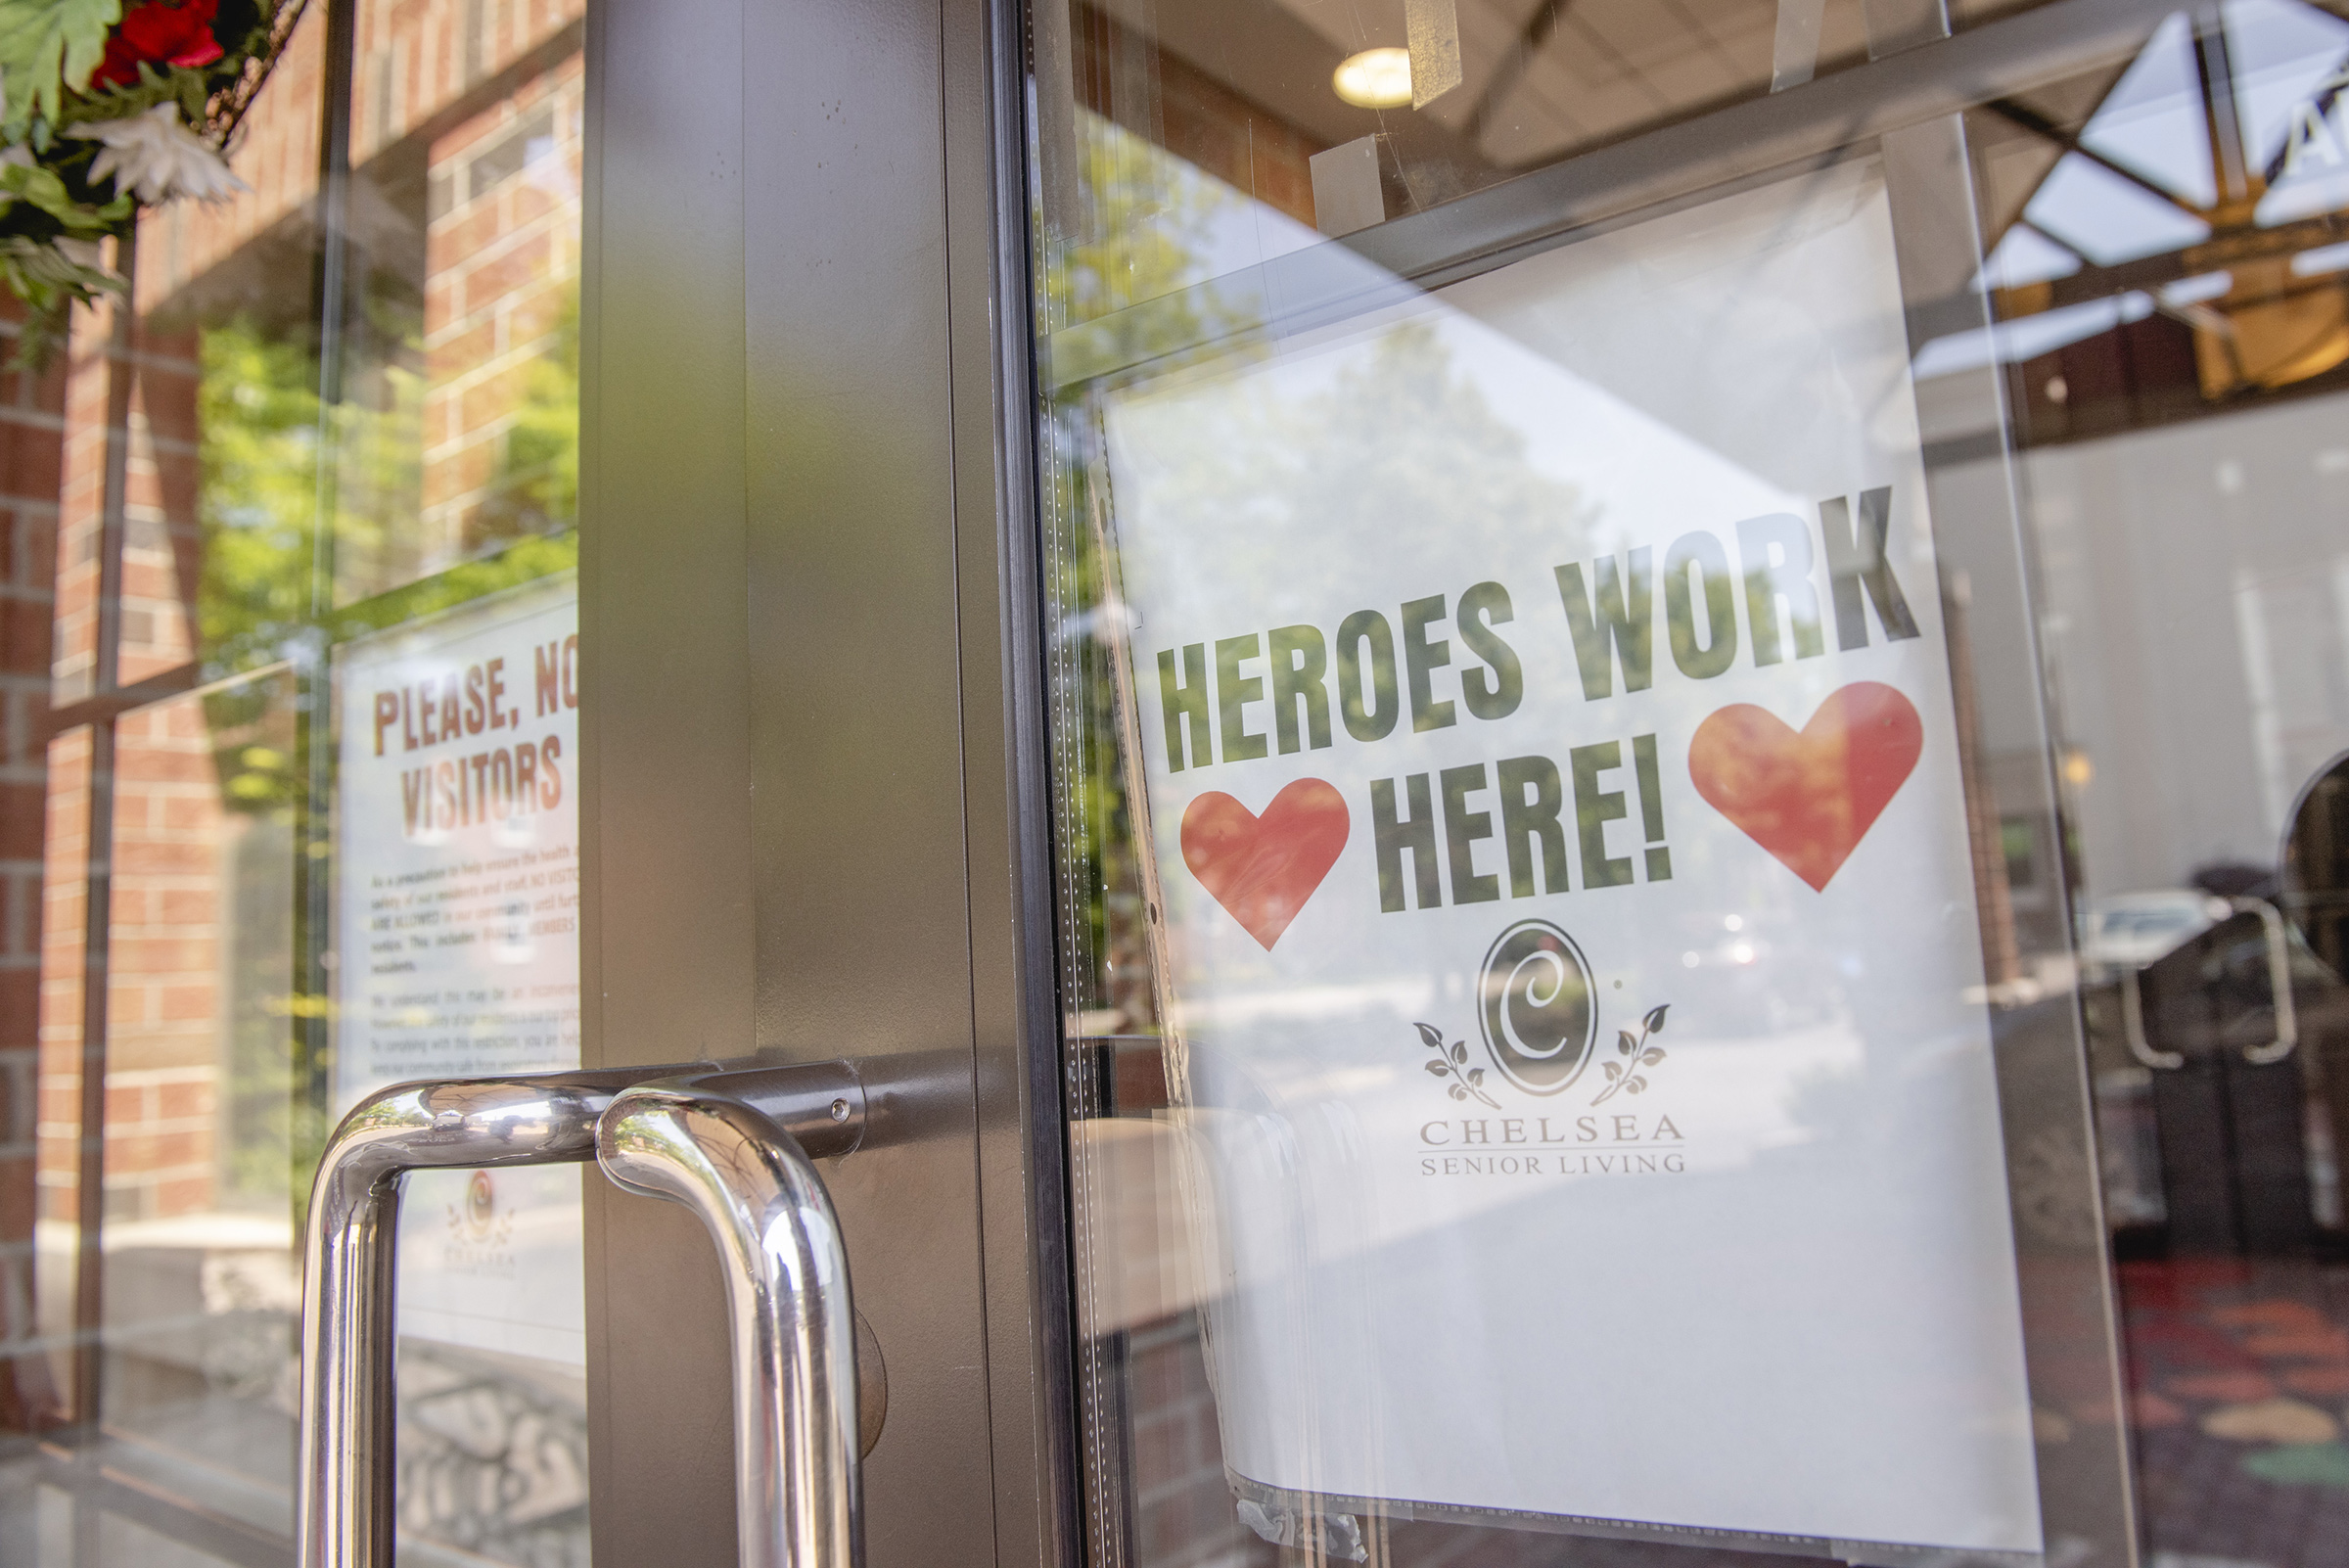 A sign reading "Heroes Work Here" is displayed in a window of the Maple Pointe Assisted Living facility in Rockville Centre, New York, on June 9 (Johnny Milano—Bloomberg/Getty Images)